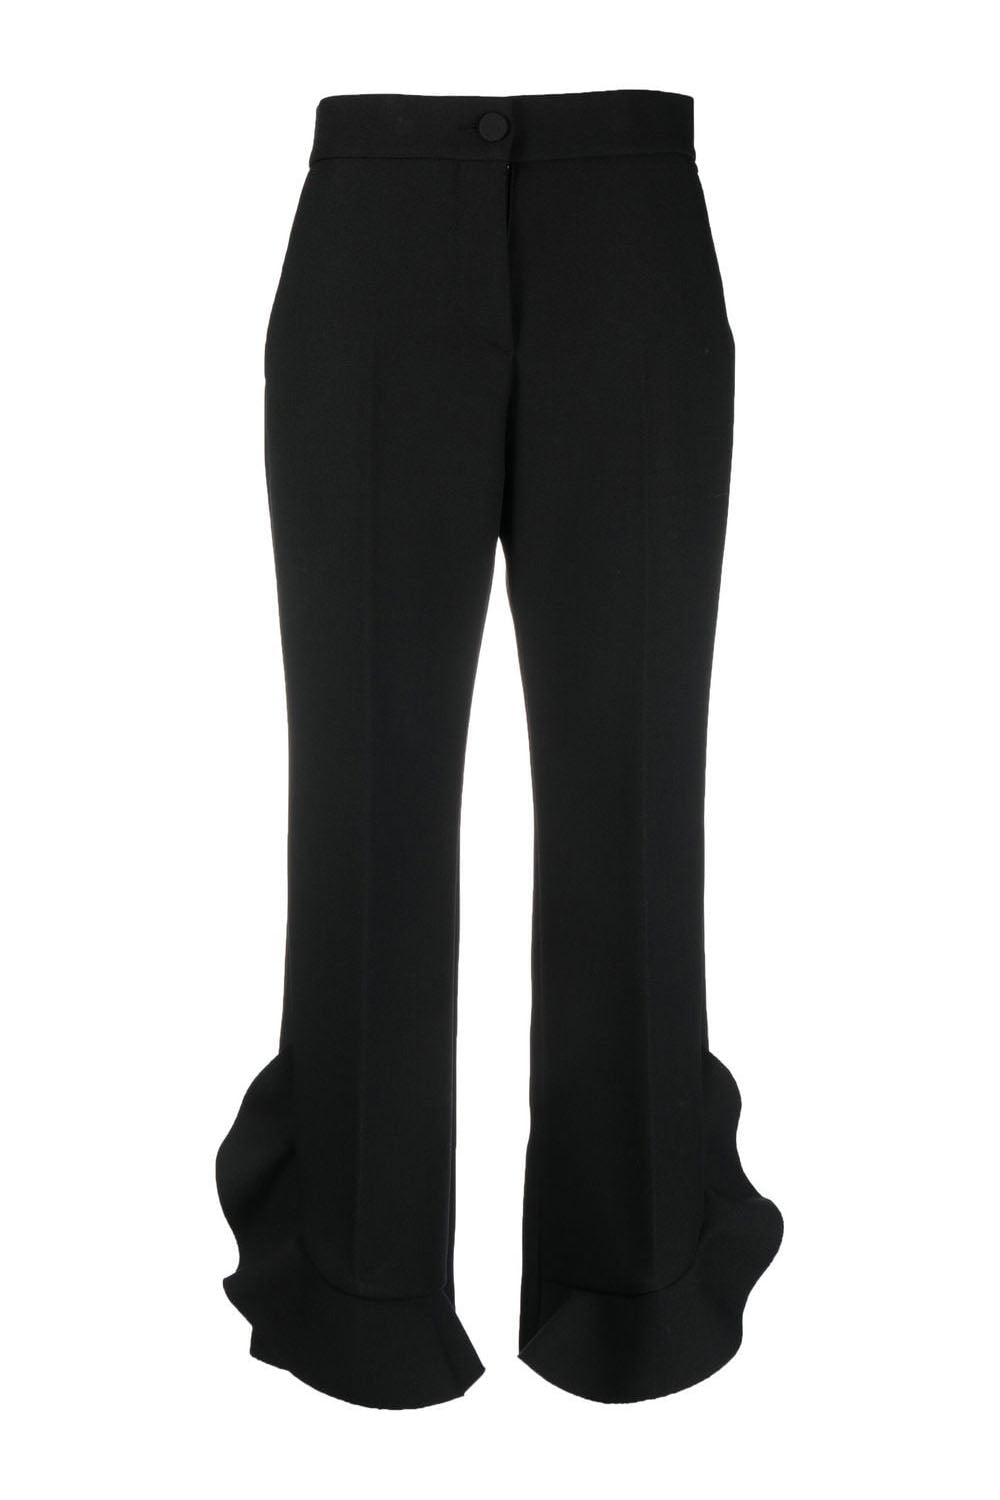 Ruffled cropped trousers, black